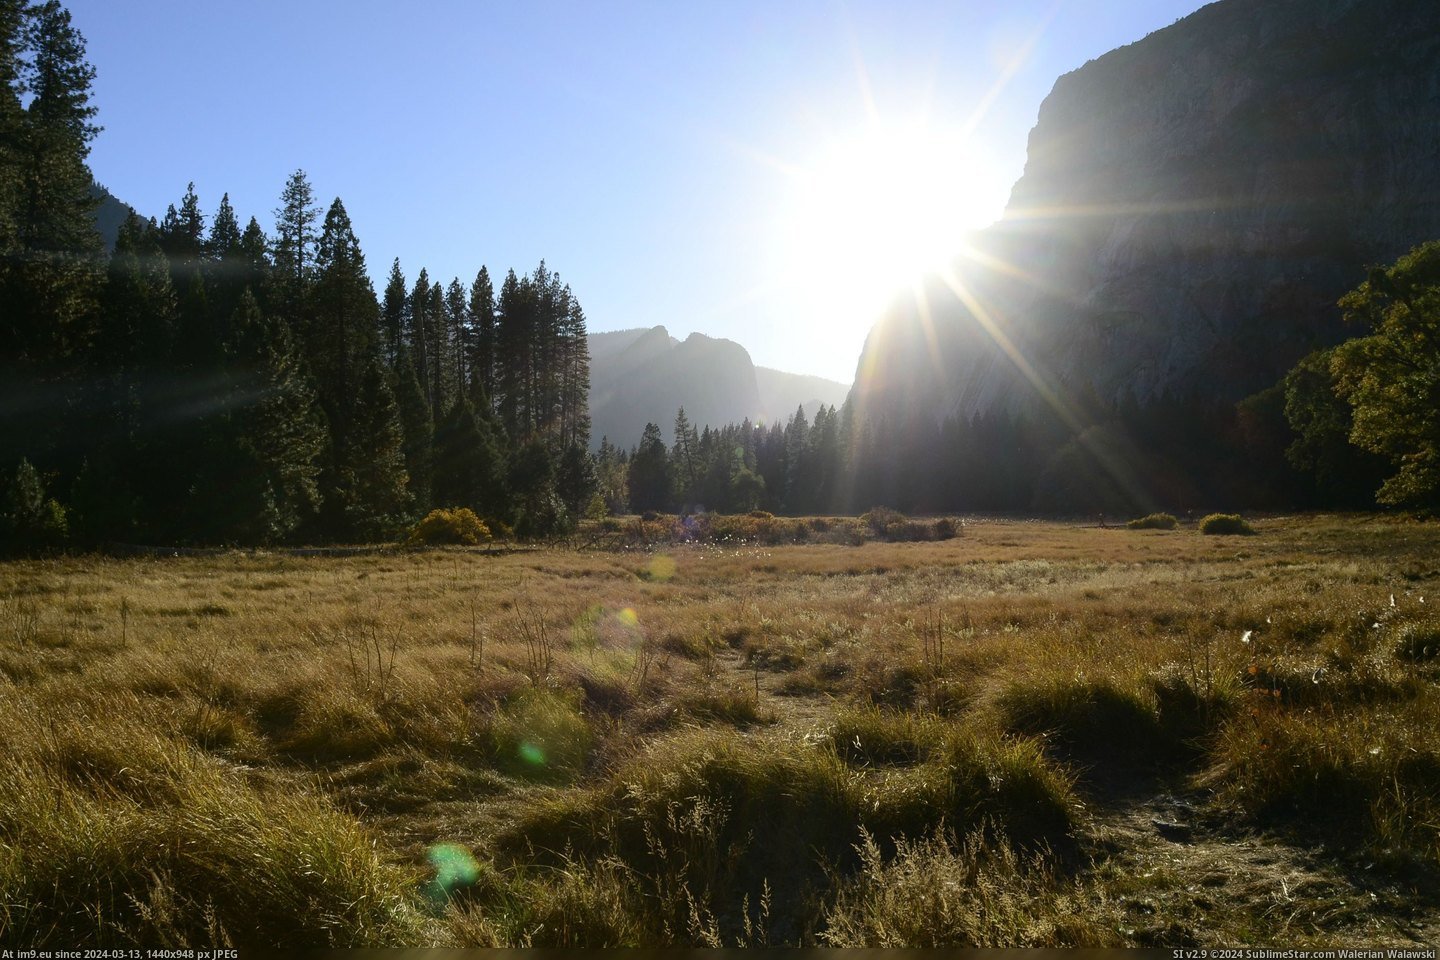 #Park #National #Feeling #Meadow #Blues #Yosemite #Month #Holiday [Earthporn] Feeling those post holiday blues, so here's a Yosemite National Park Meadow from last month. [OC] [3696x2448] Pic. (Изображение из альбом My r/EARTHPORN favs))